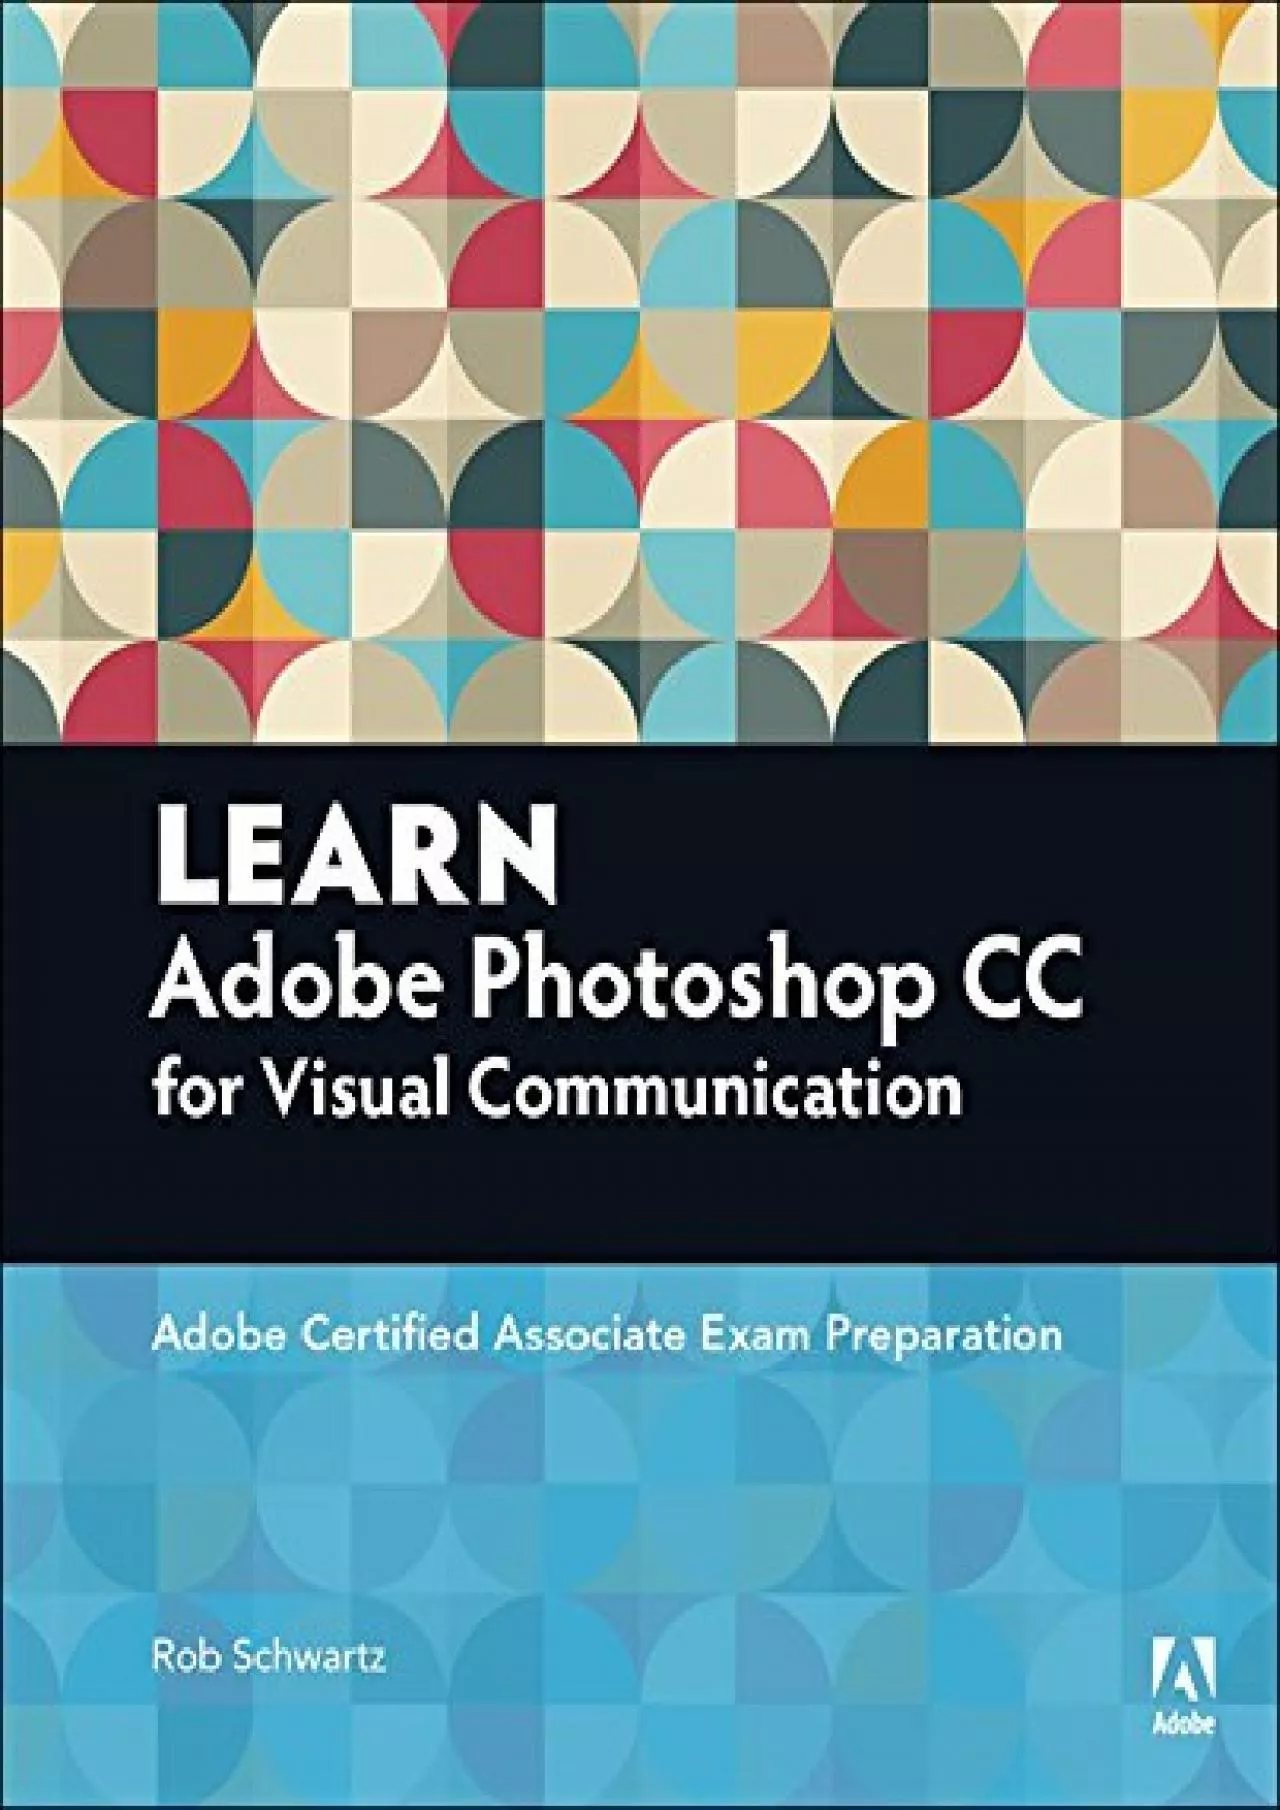 (DOWNLOAD)-Learn Adobe Photoshop CC for Visual Communication: Adobe Certified Associate